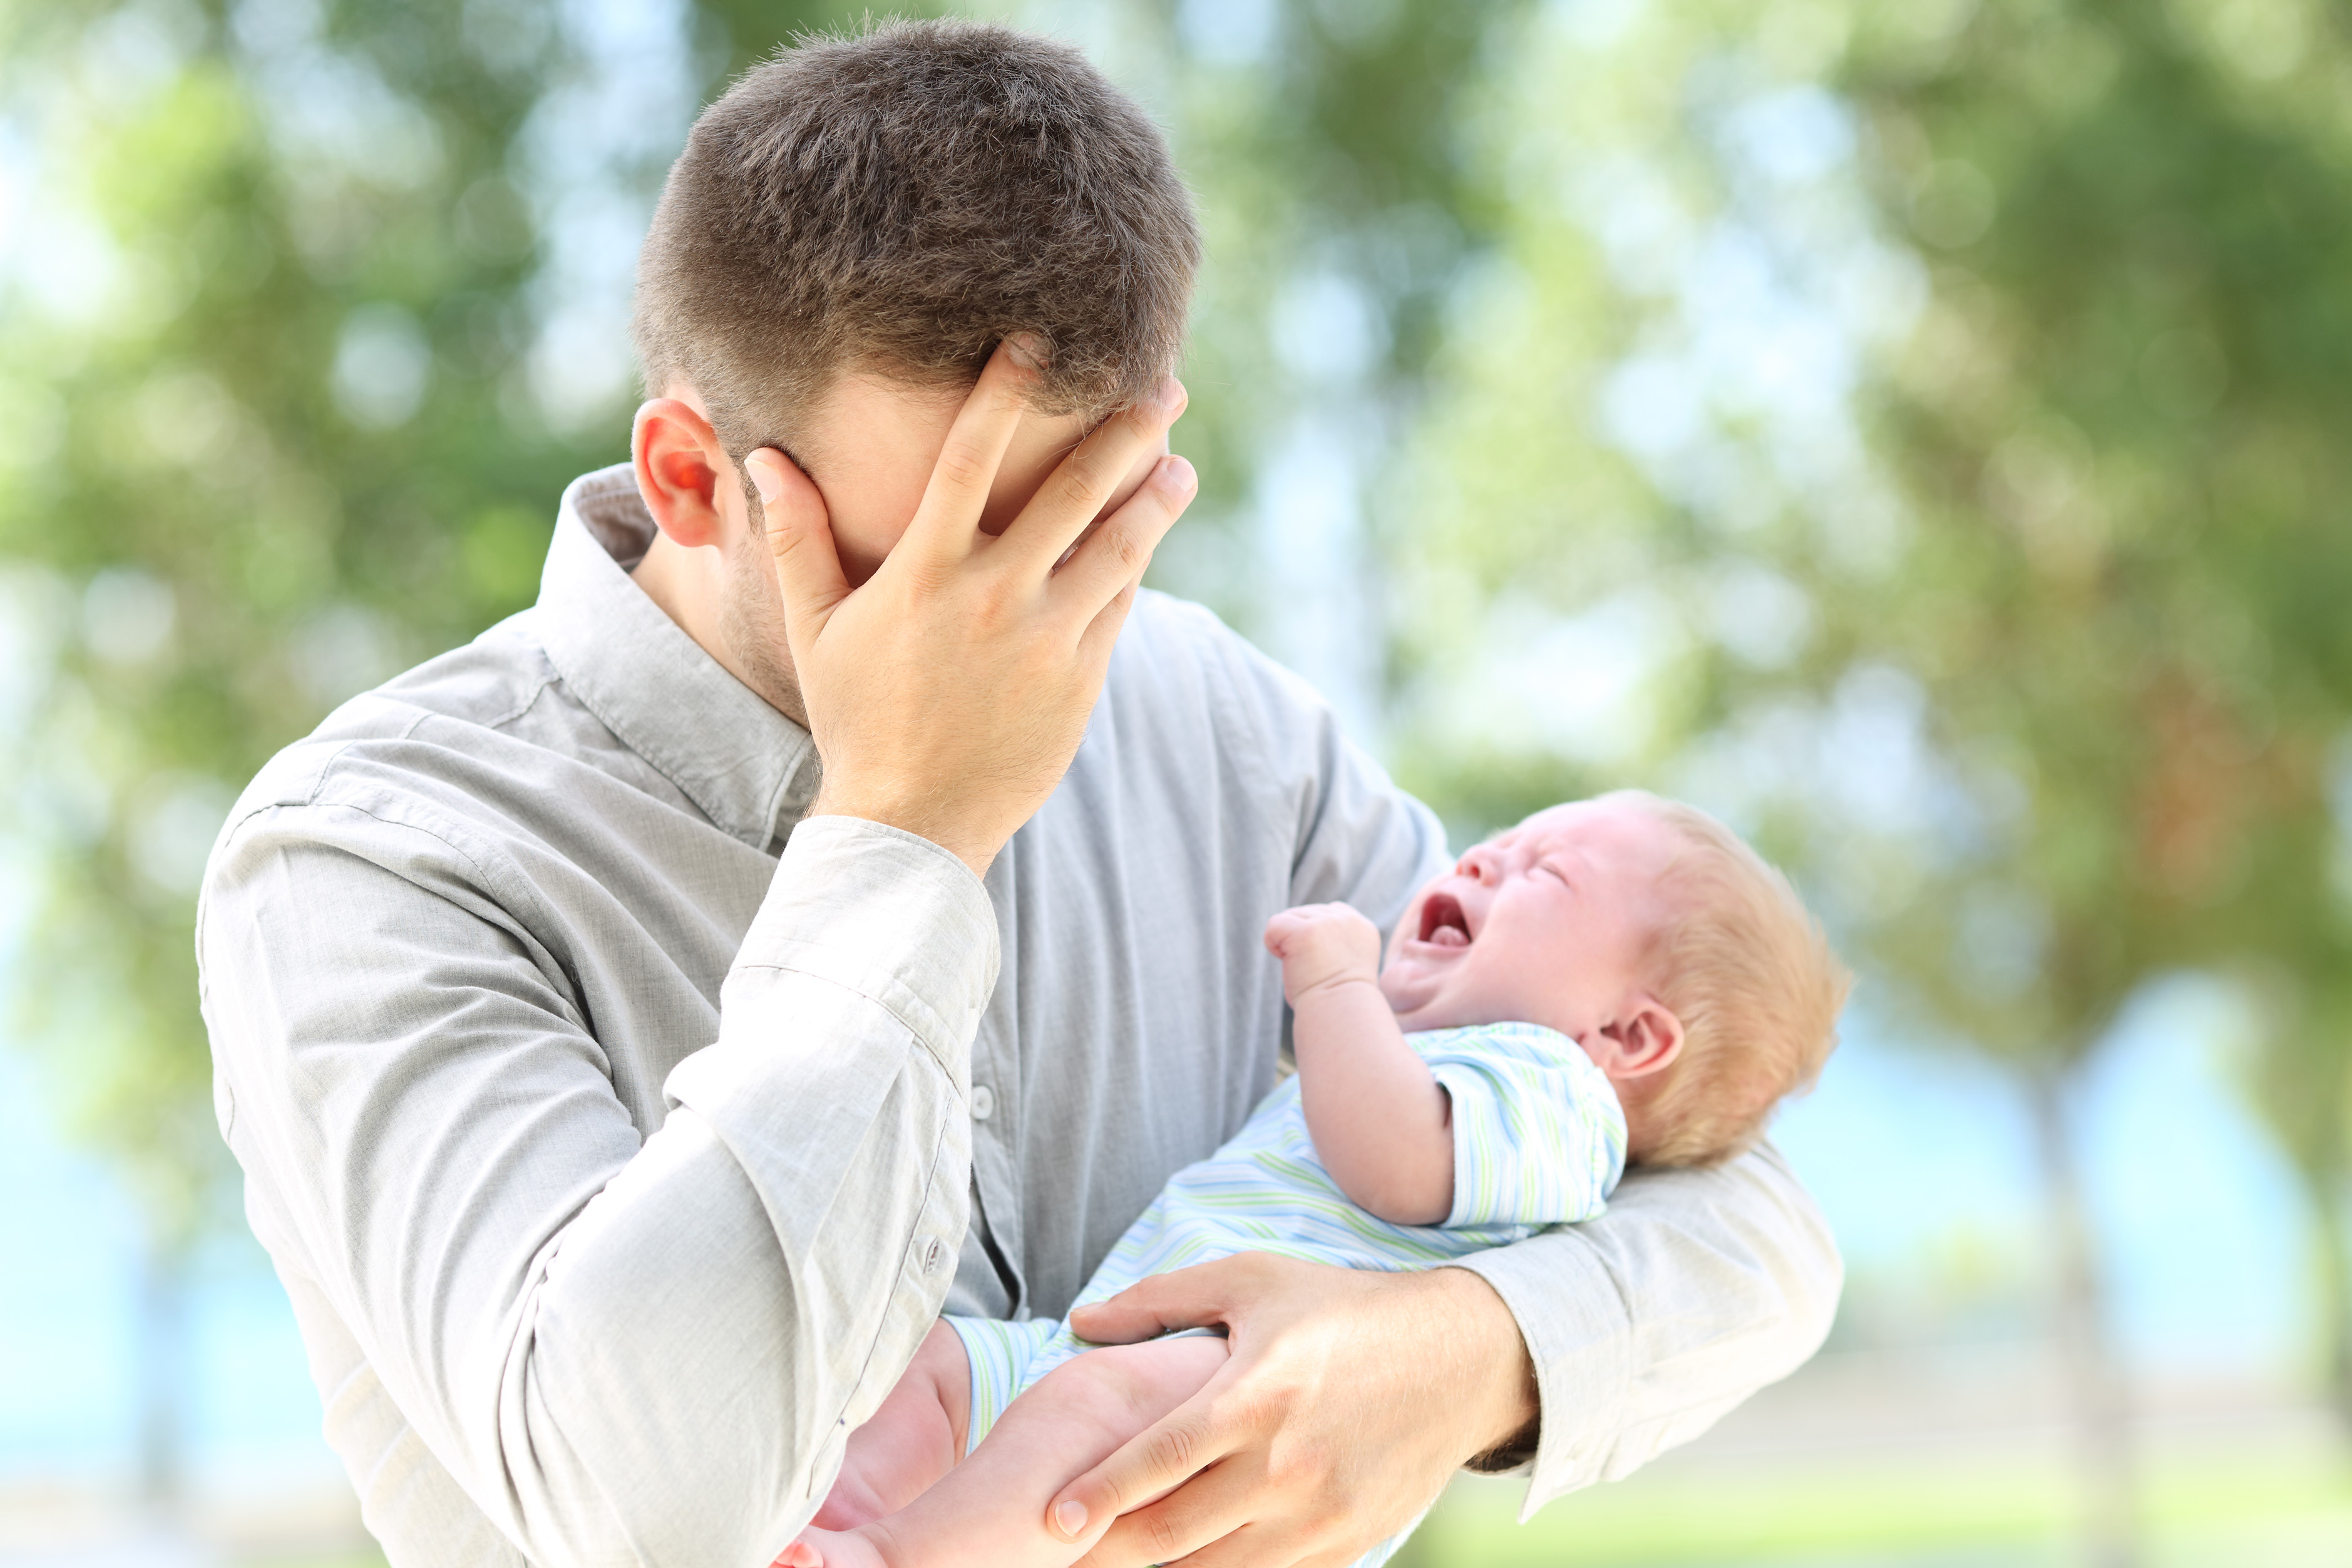 Overwhelmed dad holding crying baby